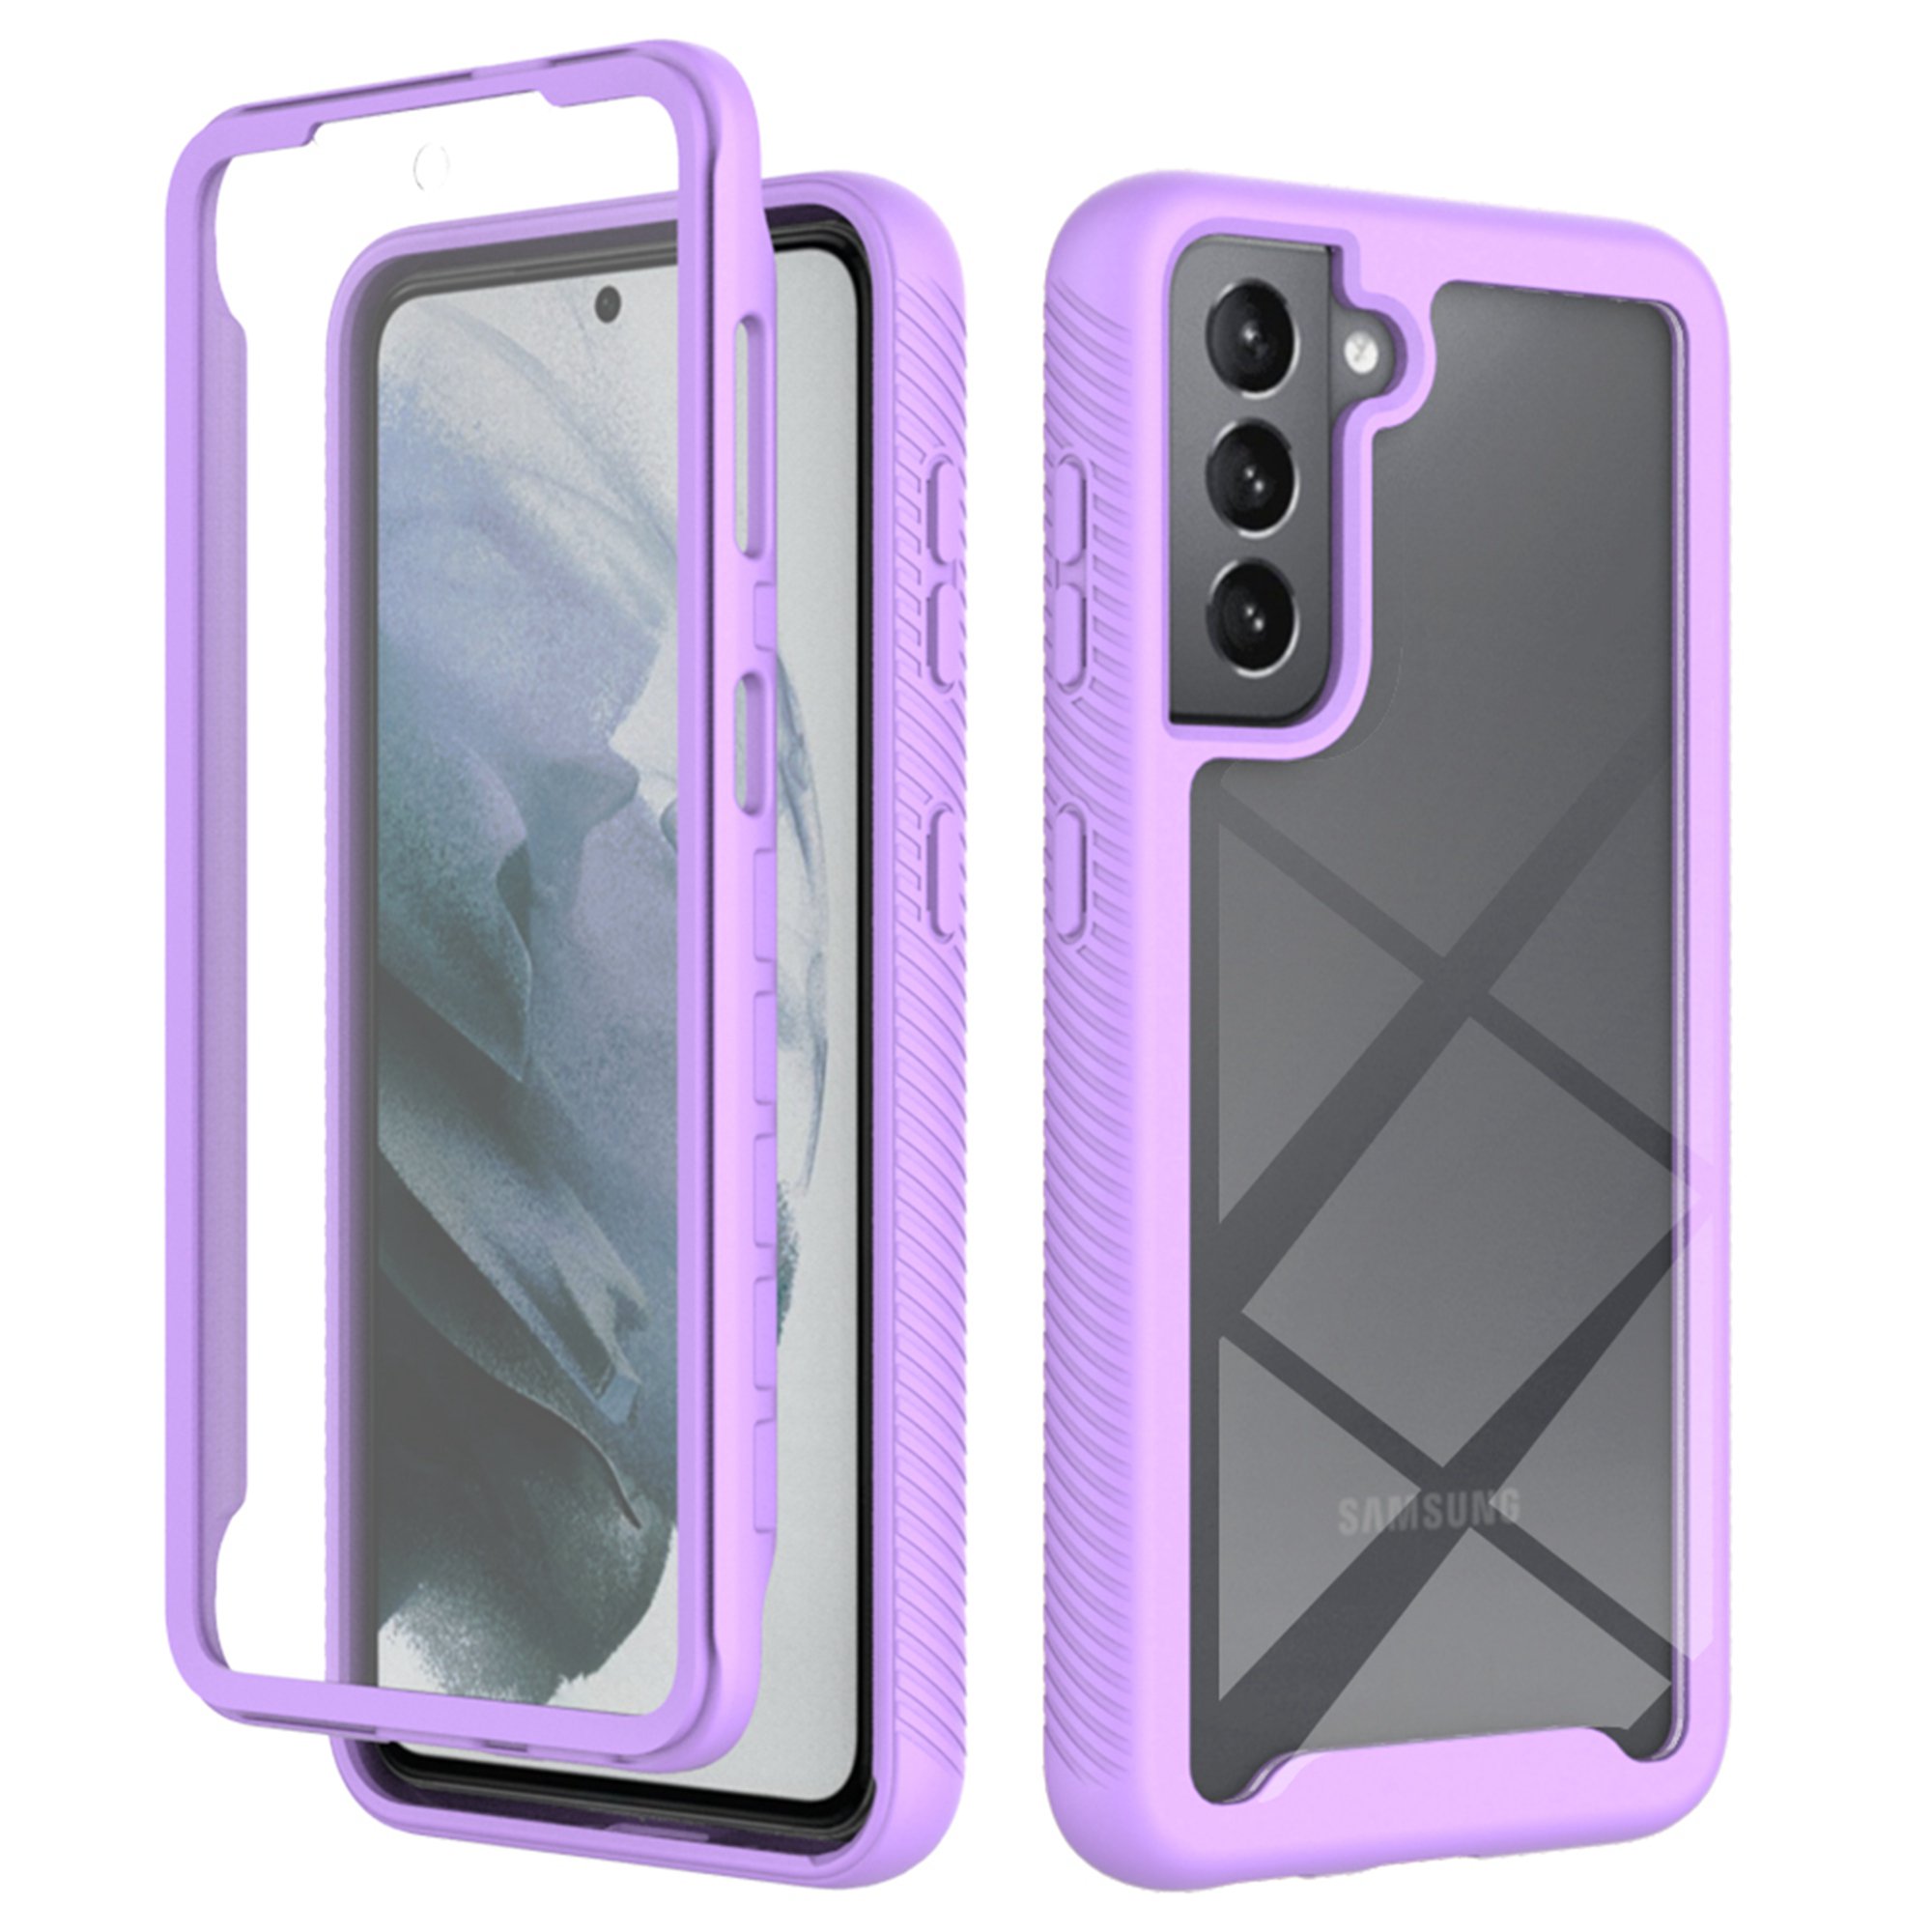 Galaxy A13 5G Case with Built in Screen Protector,Dteck Full-Body Shockproof Rubber Hybrid Protection Crystal Clear PC Back Protective Phone Case Cover for Samsung Galaxy A13 5G,Purple